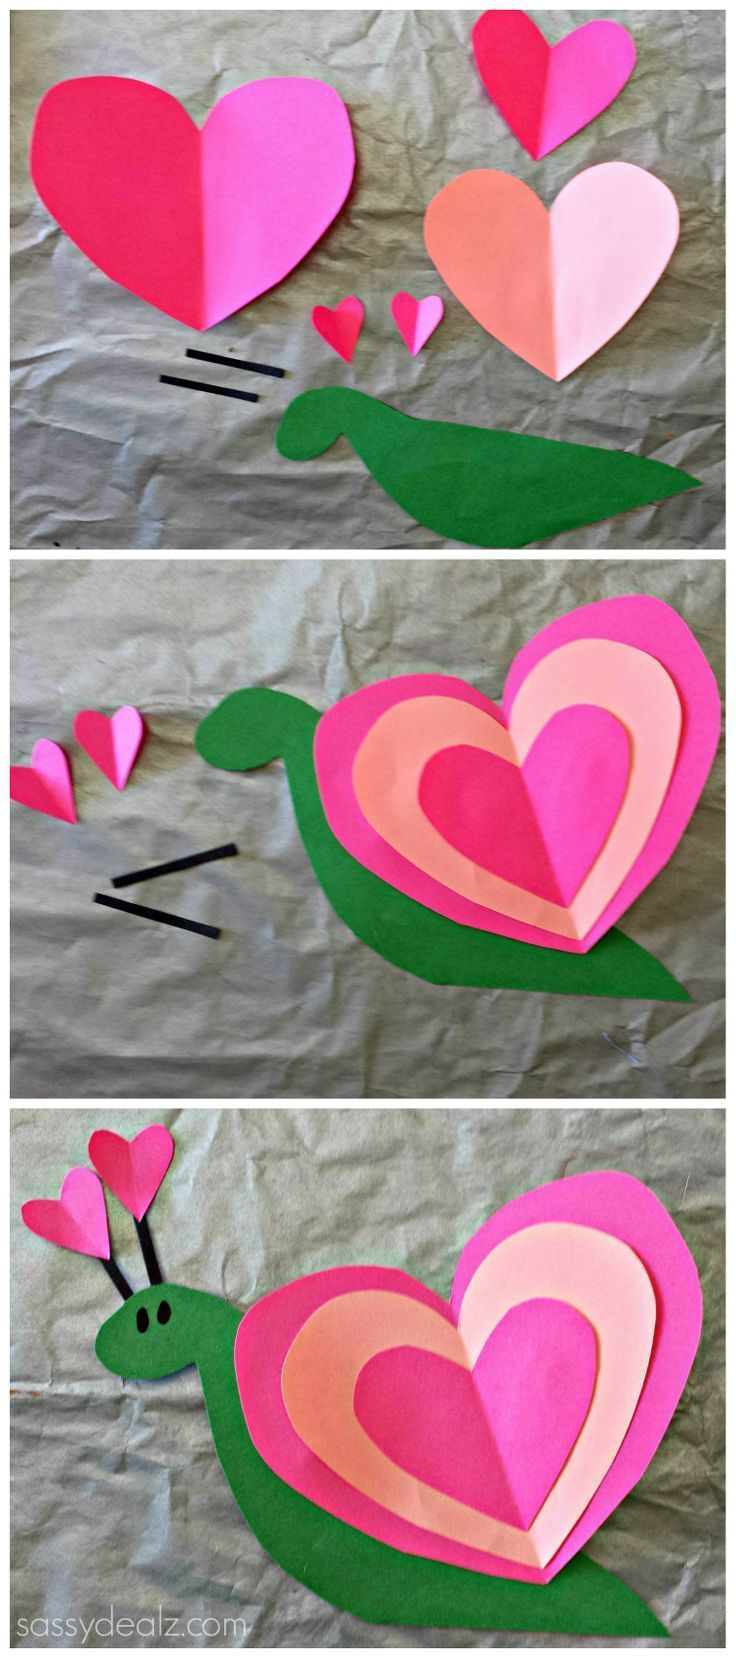 Valentine Arts And Crafts For Preschoolers
 202 best images about Preschool Valentine s Day Crafts on